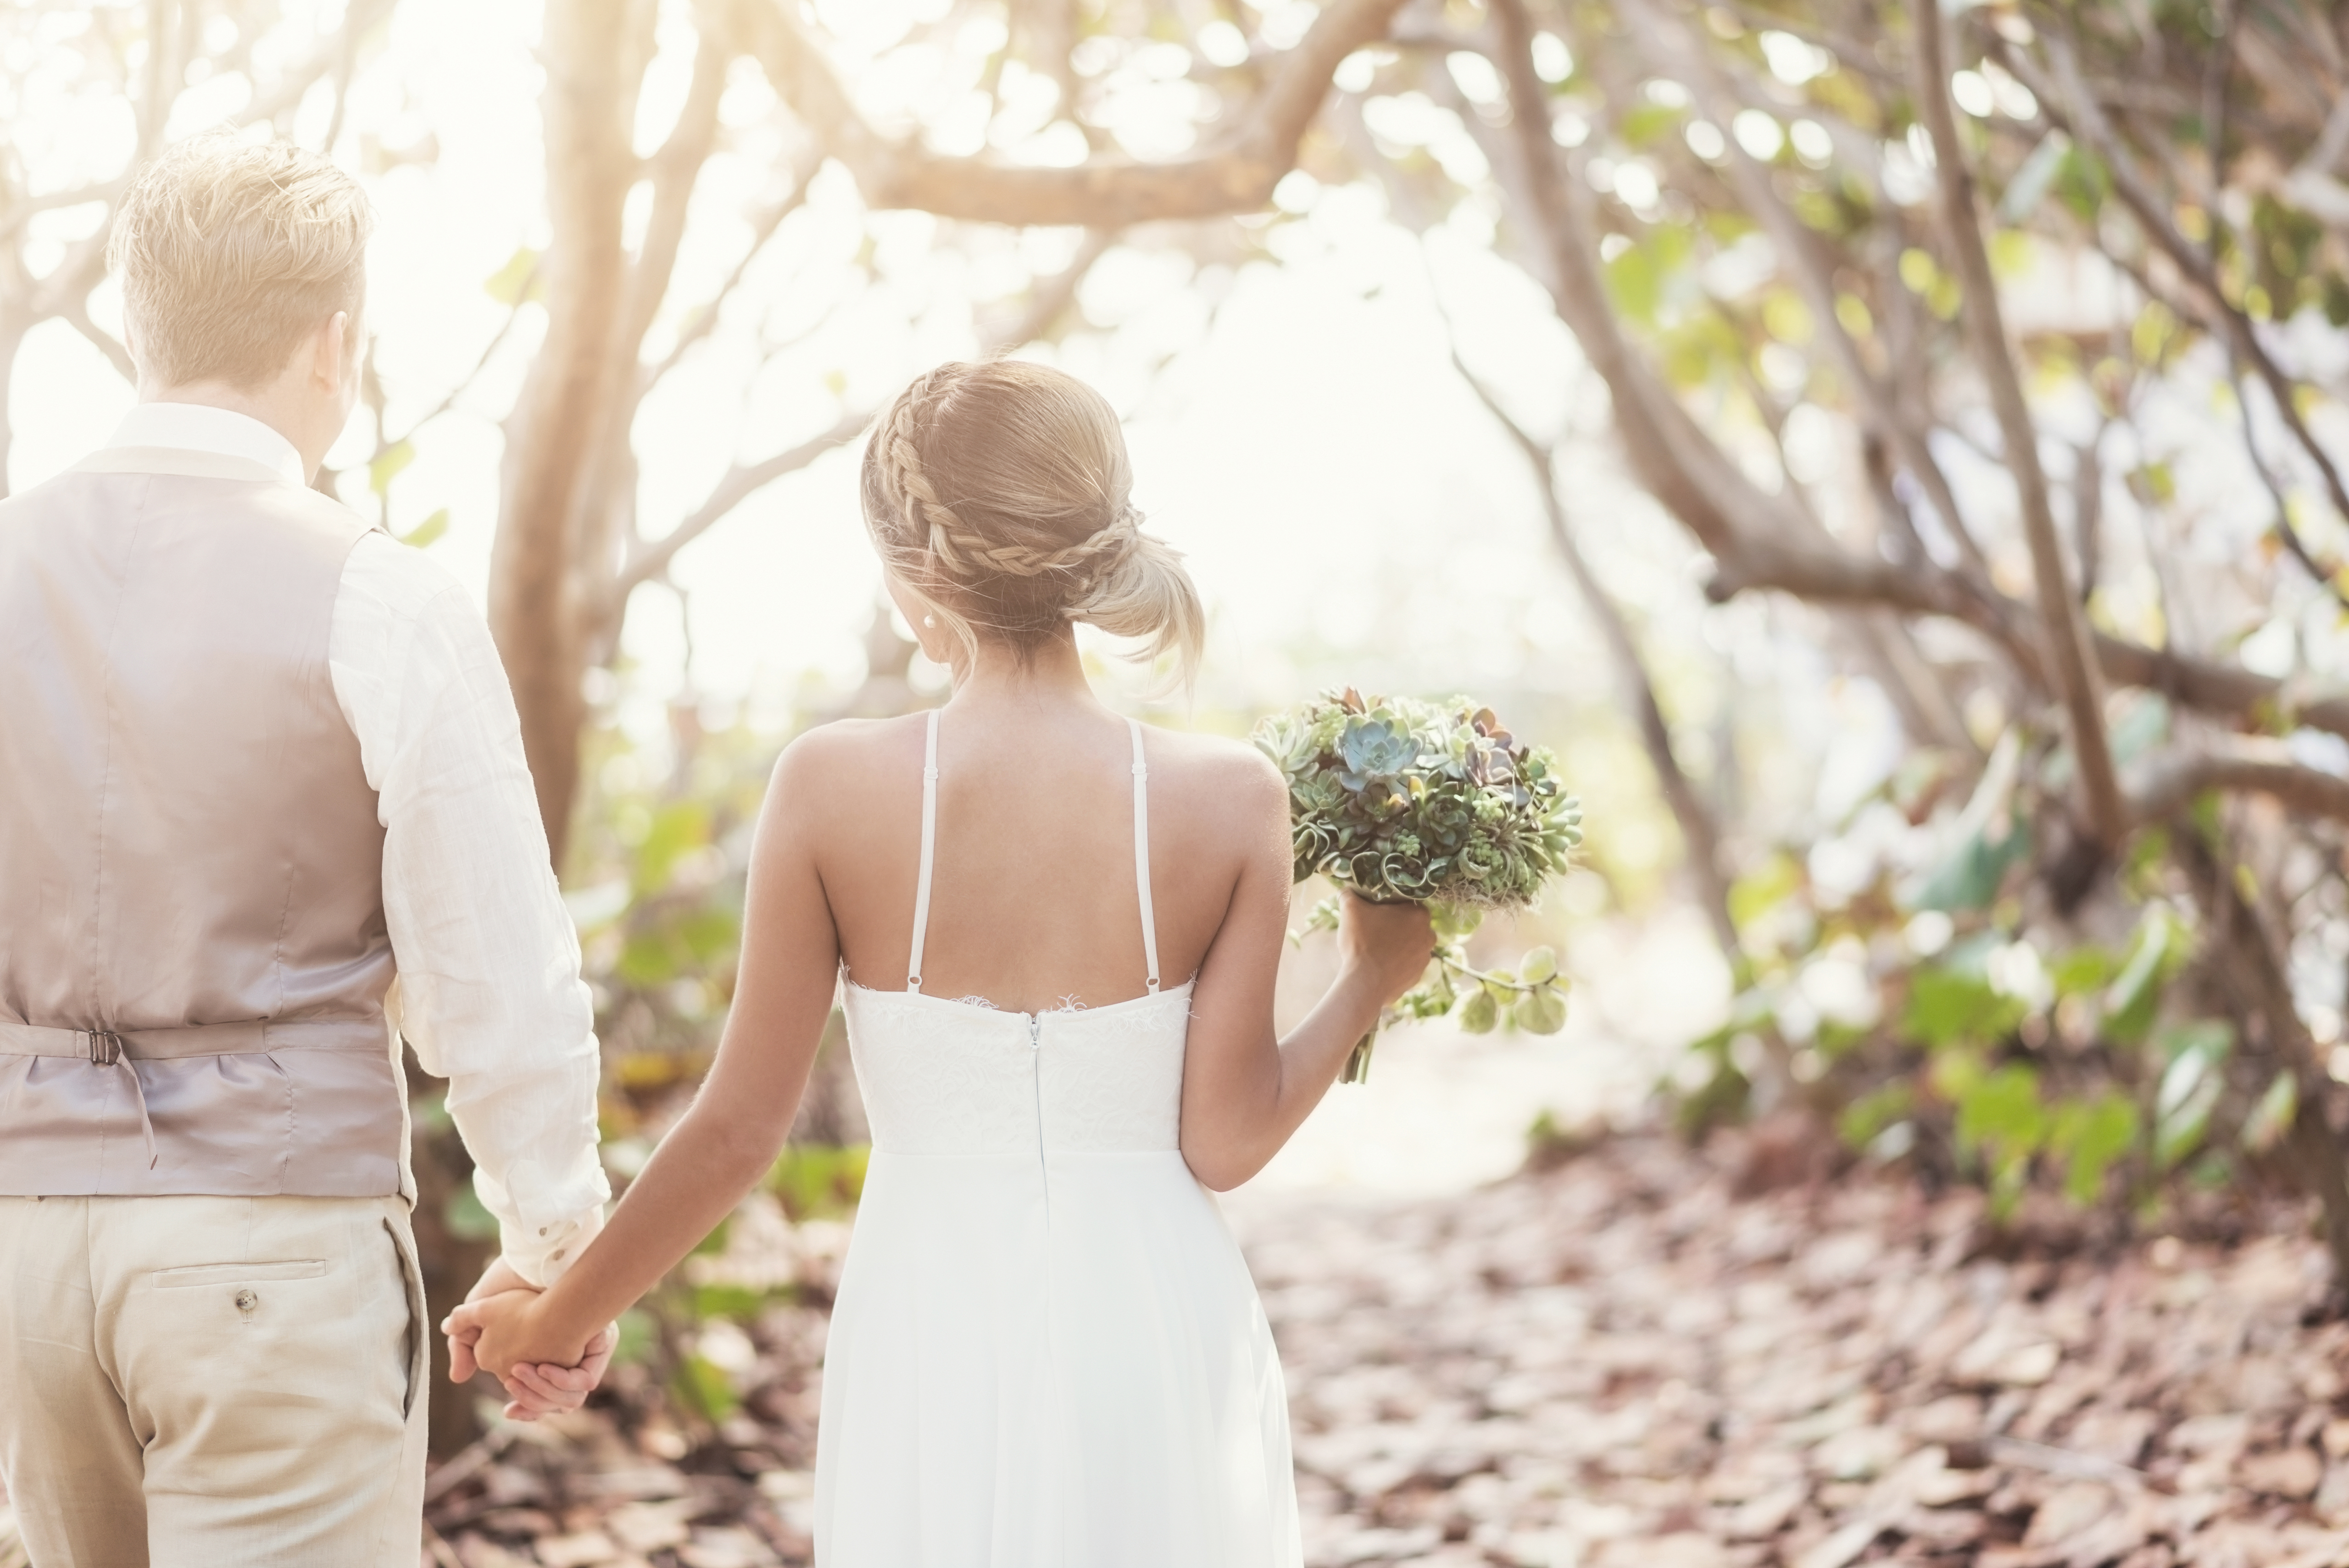 5 Questions to Ask Yourself Before Married Time